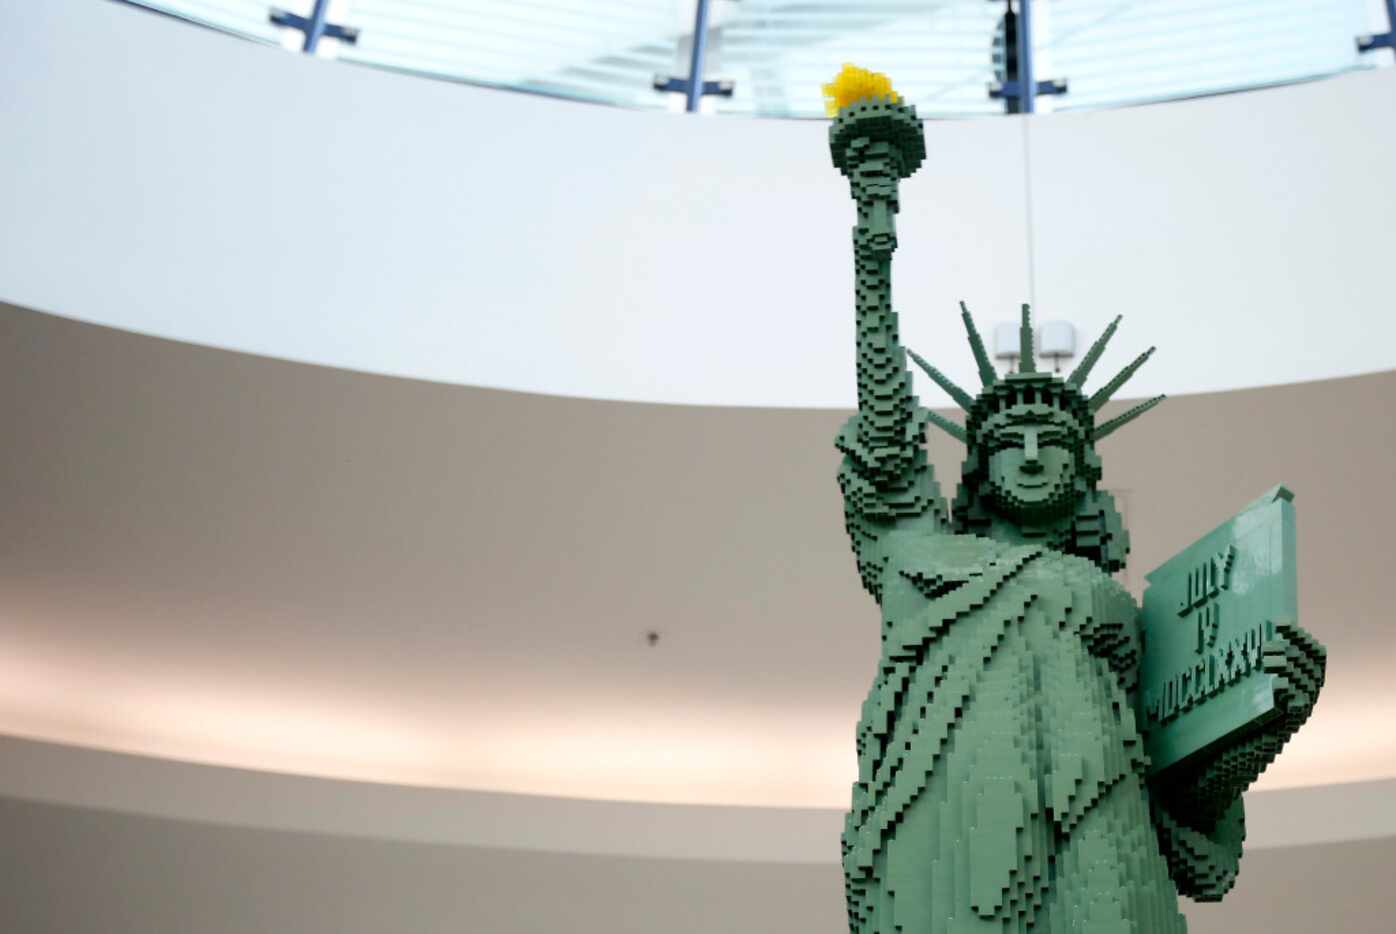 A representation of The Statue of Liberty, one of the famous landmarks made entirely of Lego...